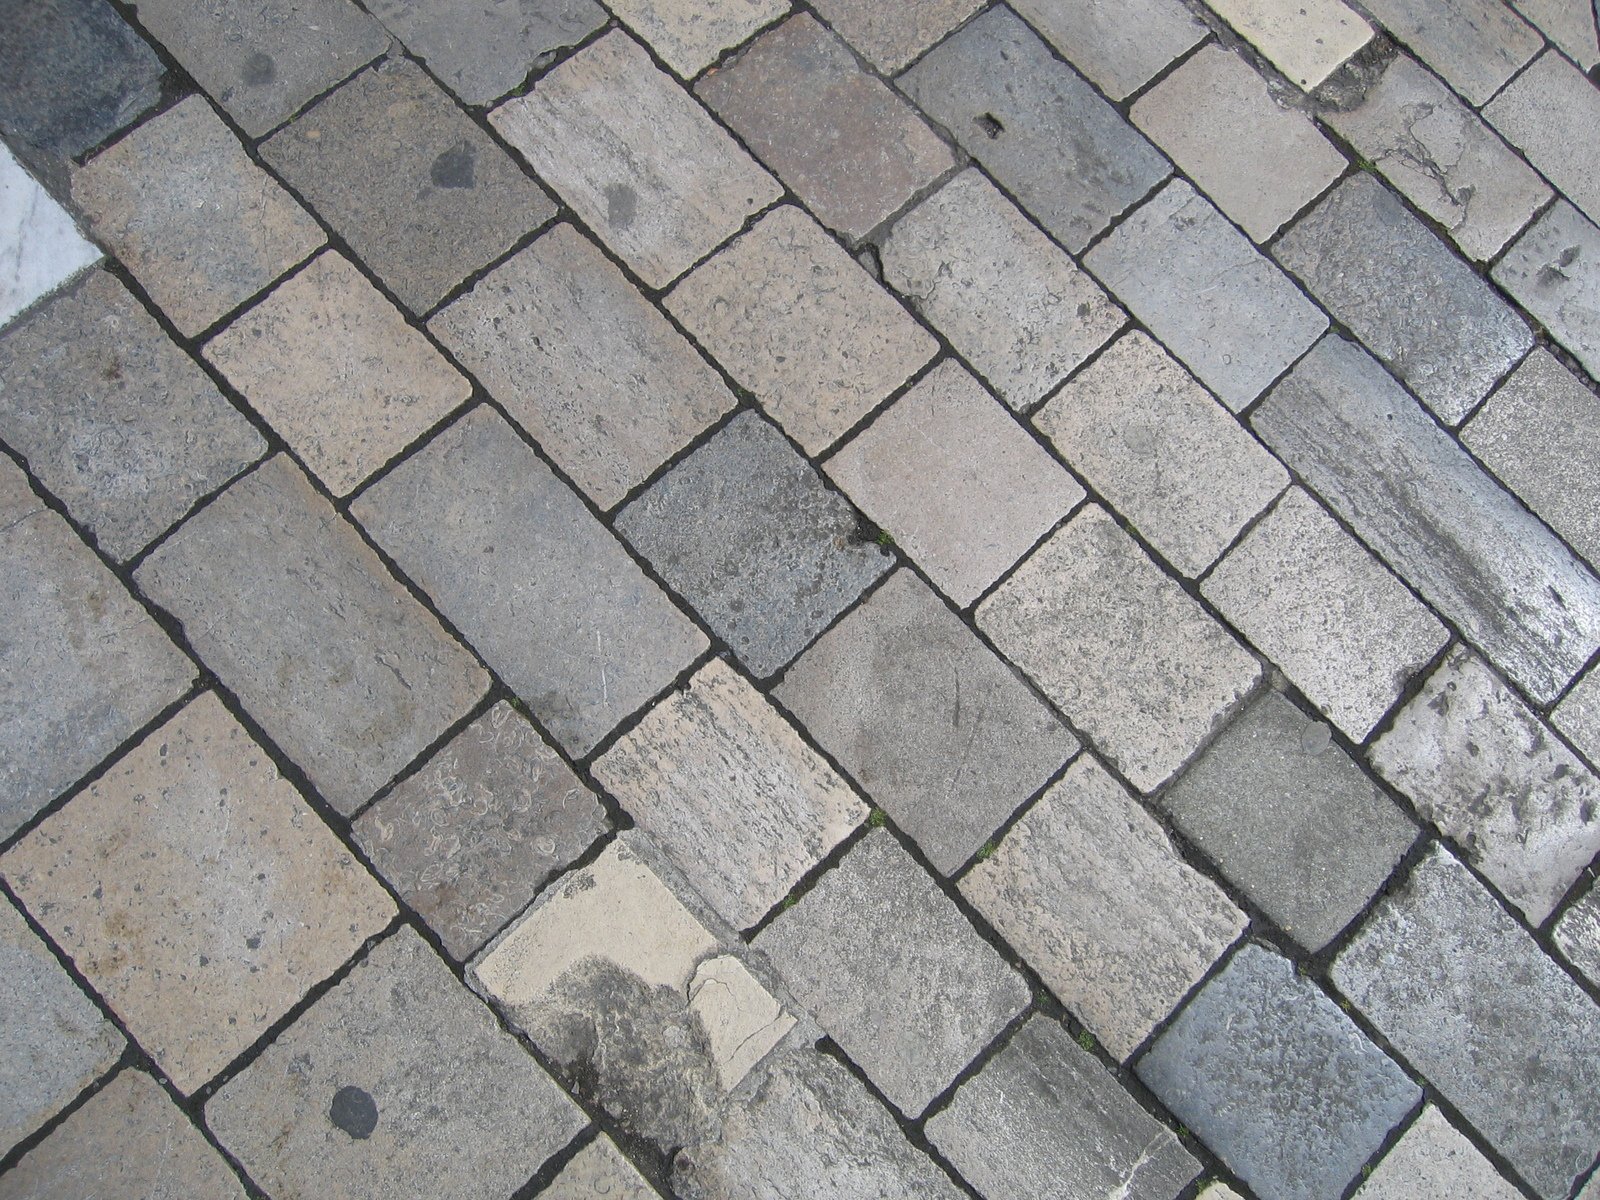 a view of an outdoor brick sidewalk, taken from above